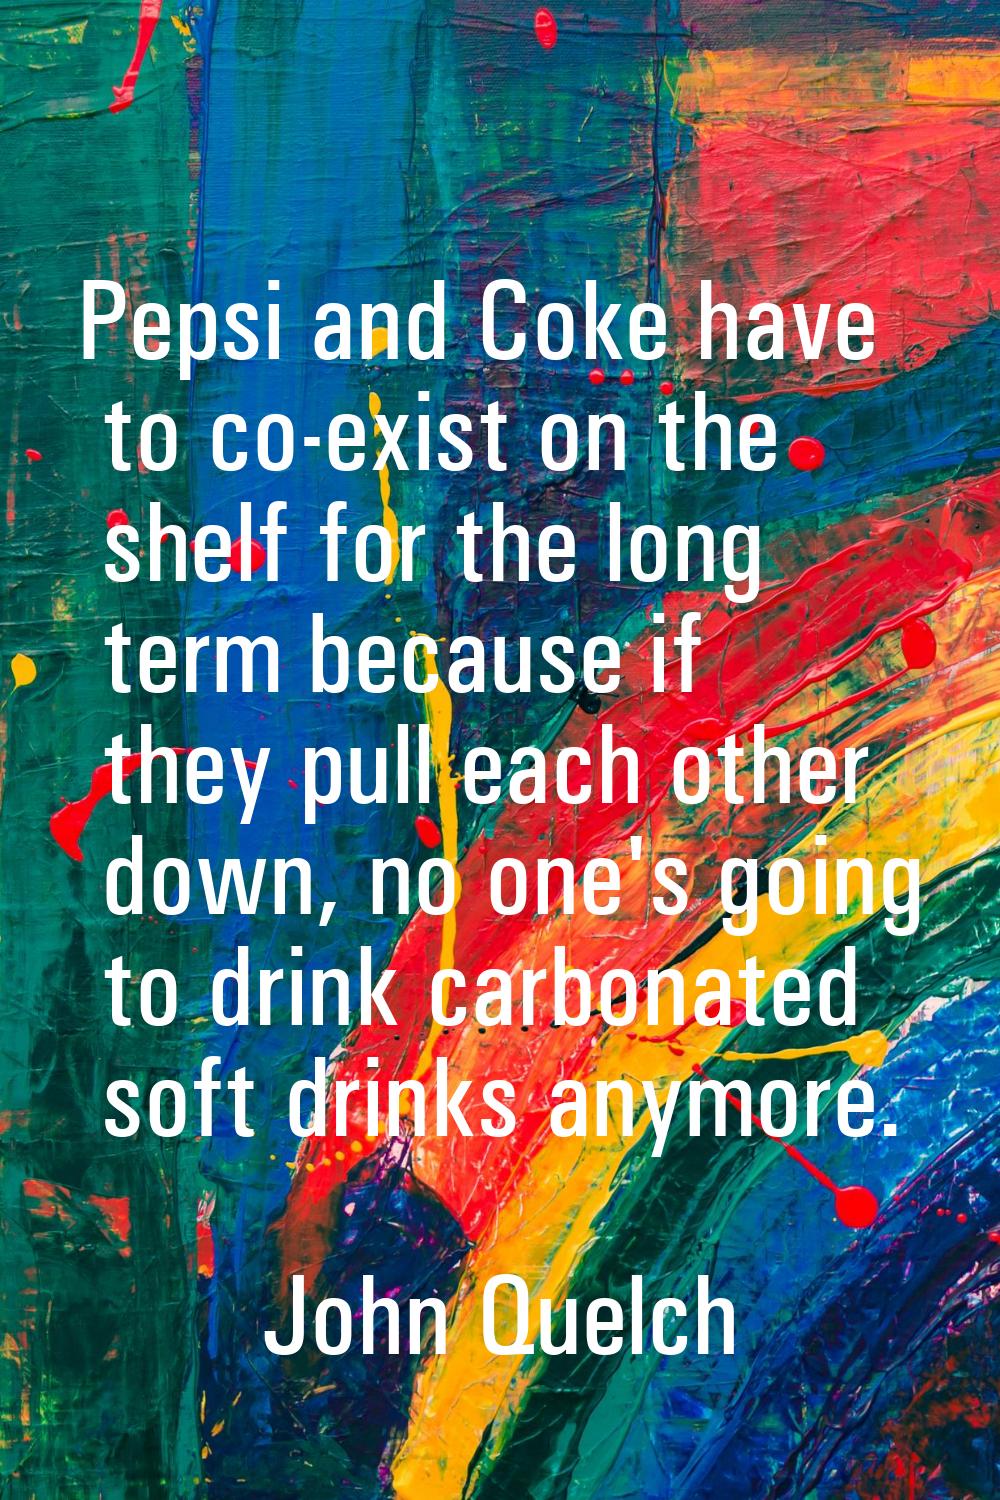 Pepsi and Coke have to co-exist on the shelf for the long term because if they pull each other down